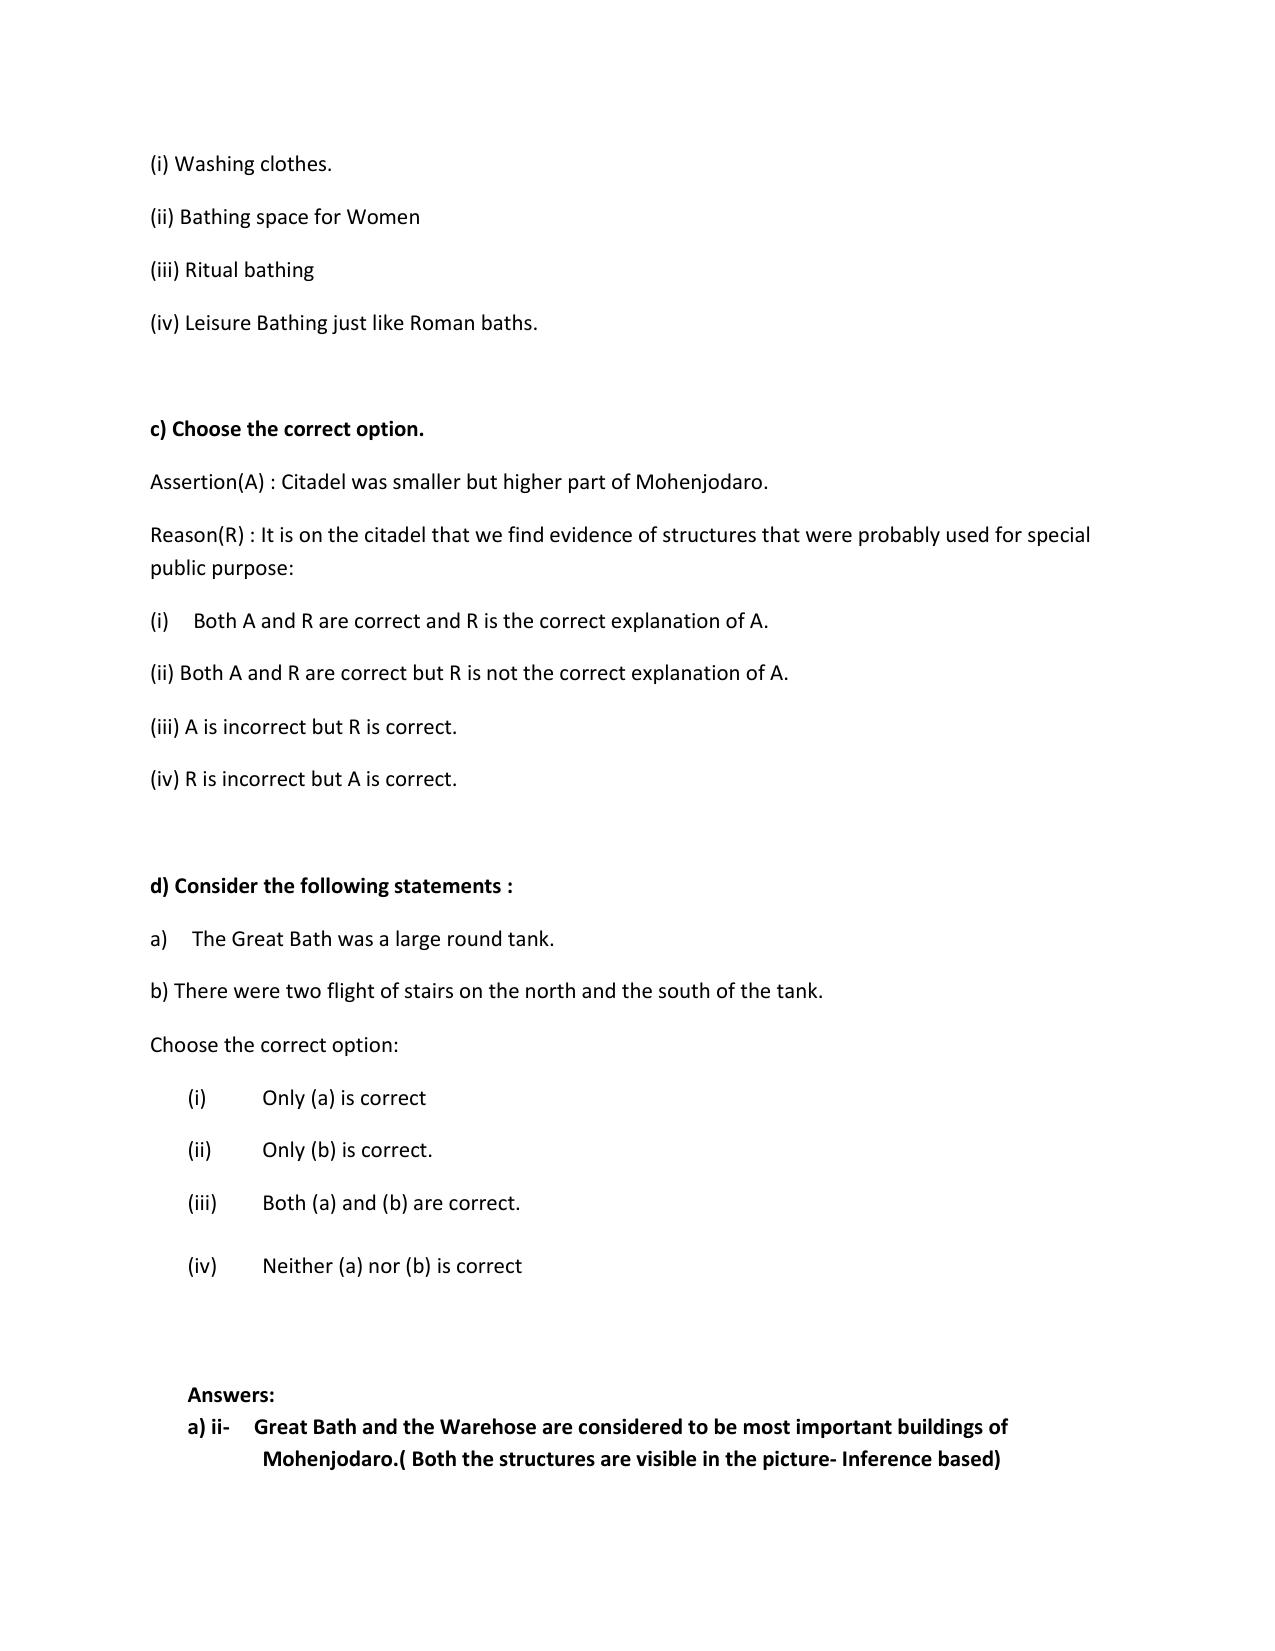 CBSE Class XII History Question Bank - Page 4